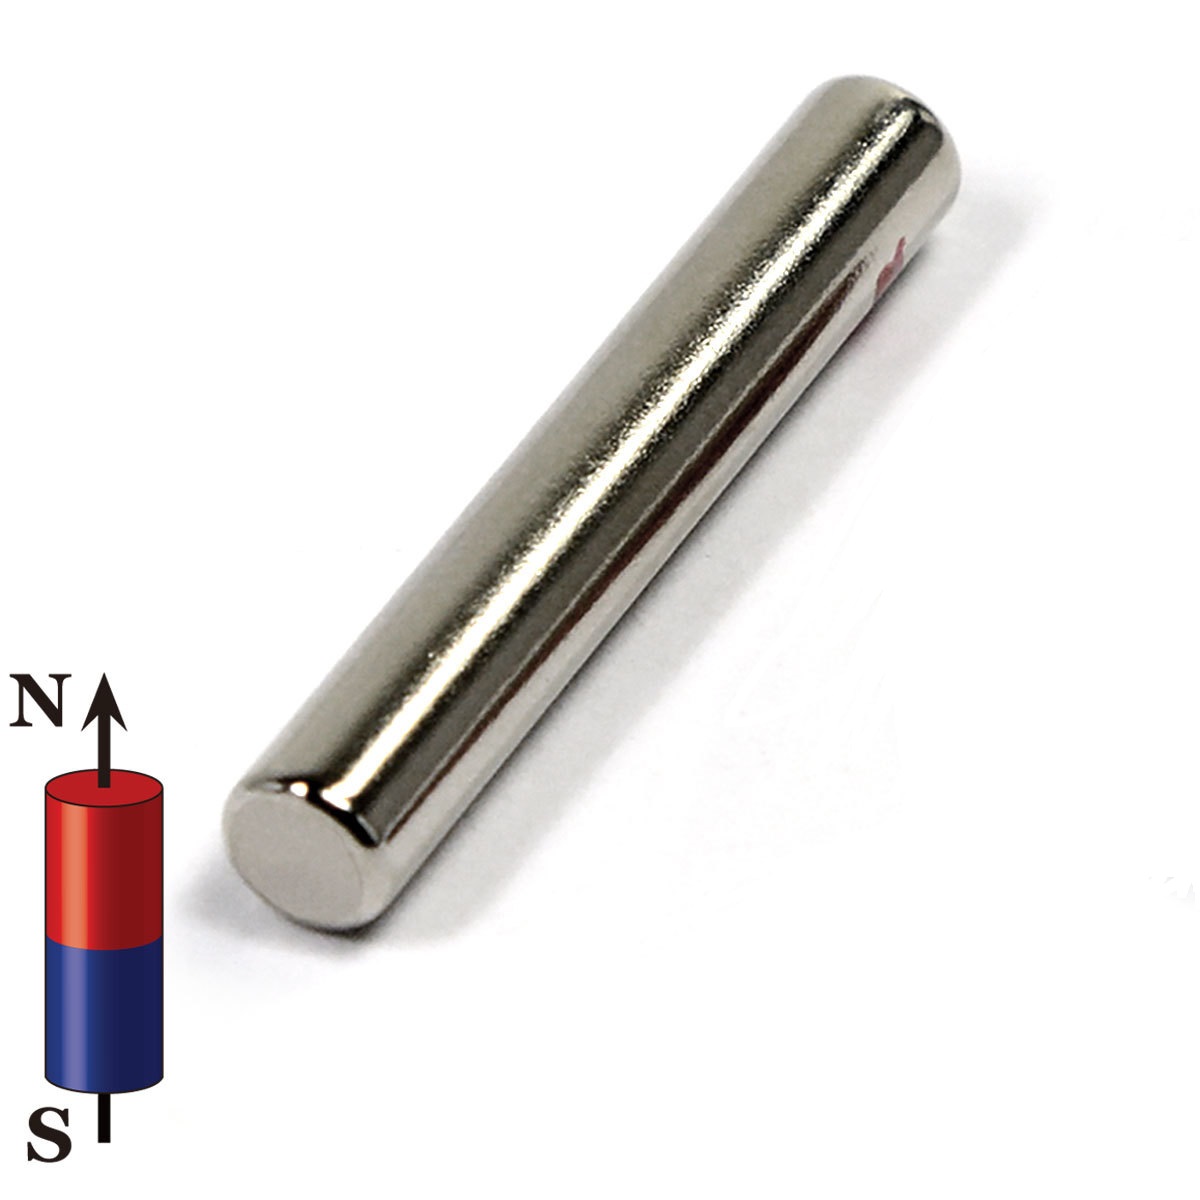 Magnets 5x10 mm N50 High Quality Neodymium Rods strong neo magnet 5mm dia x 10mm 